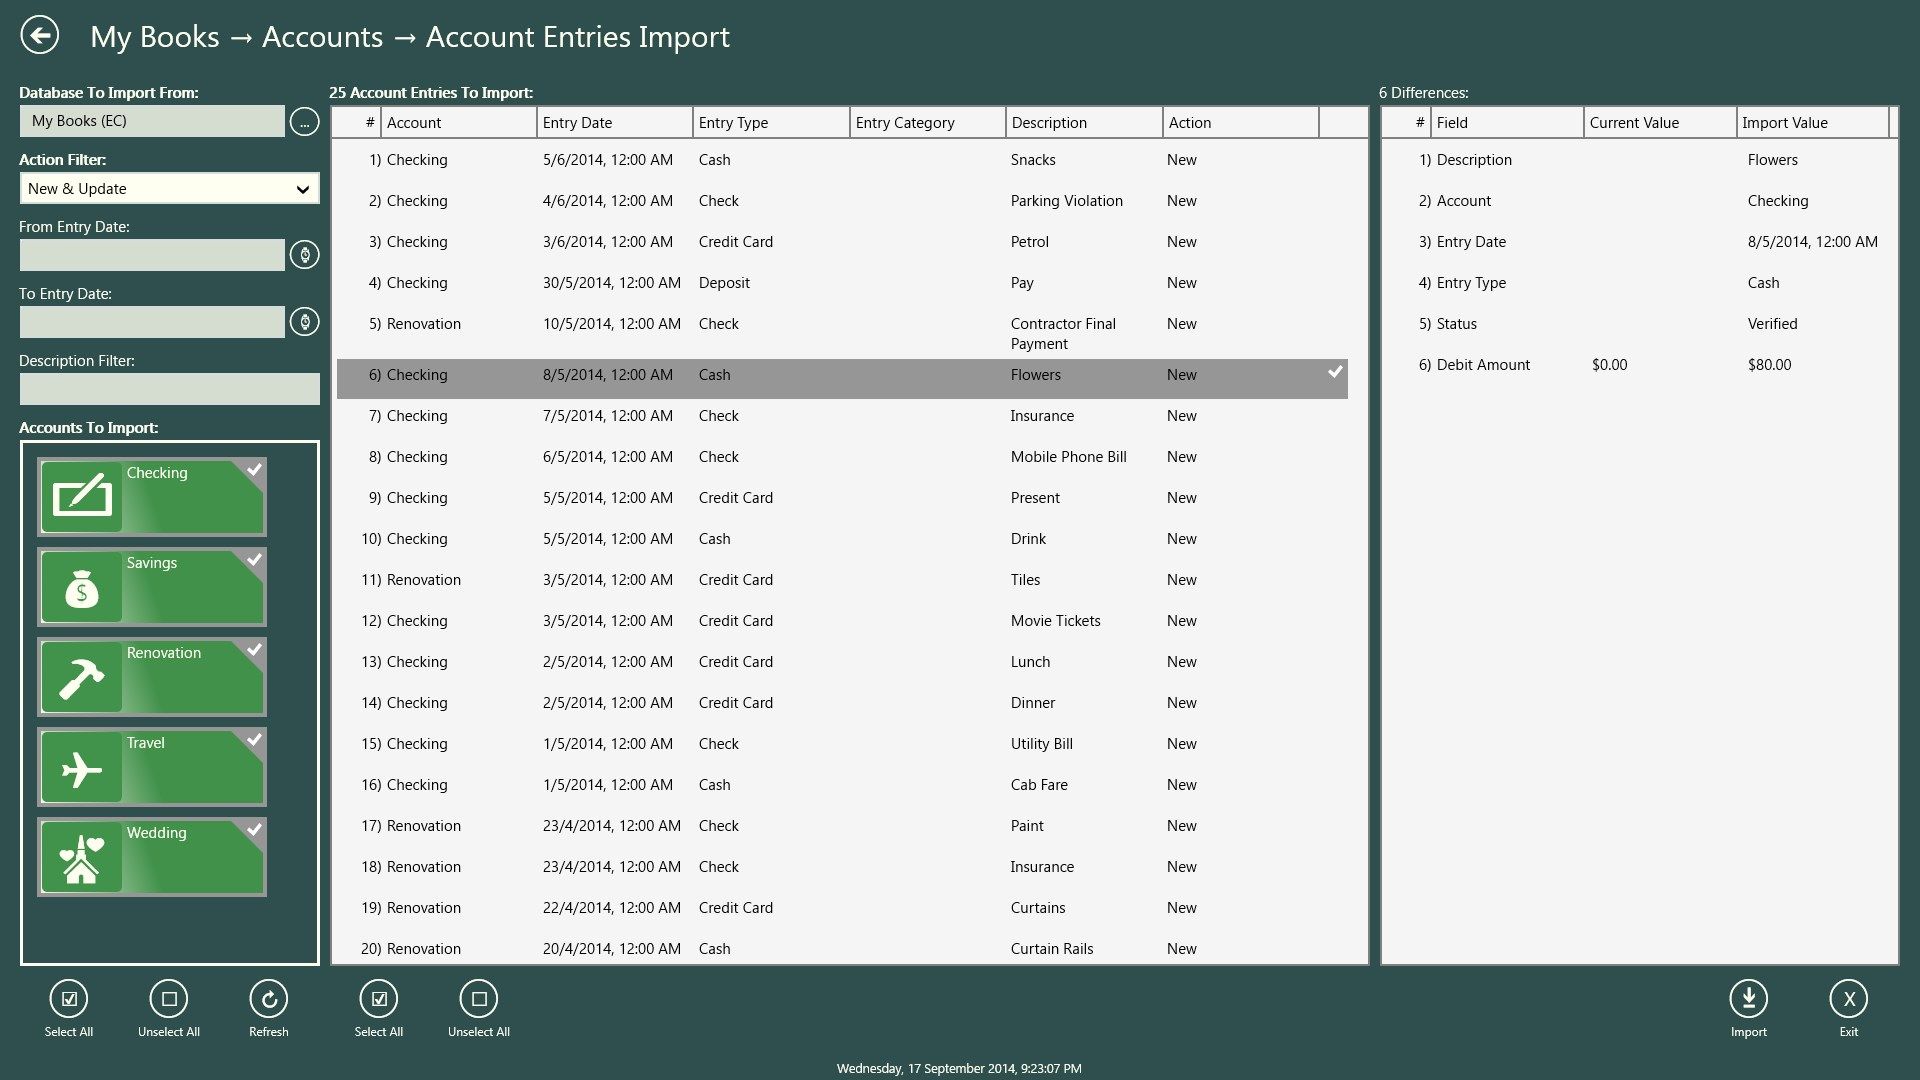 Account Entries Import